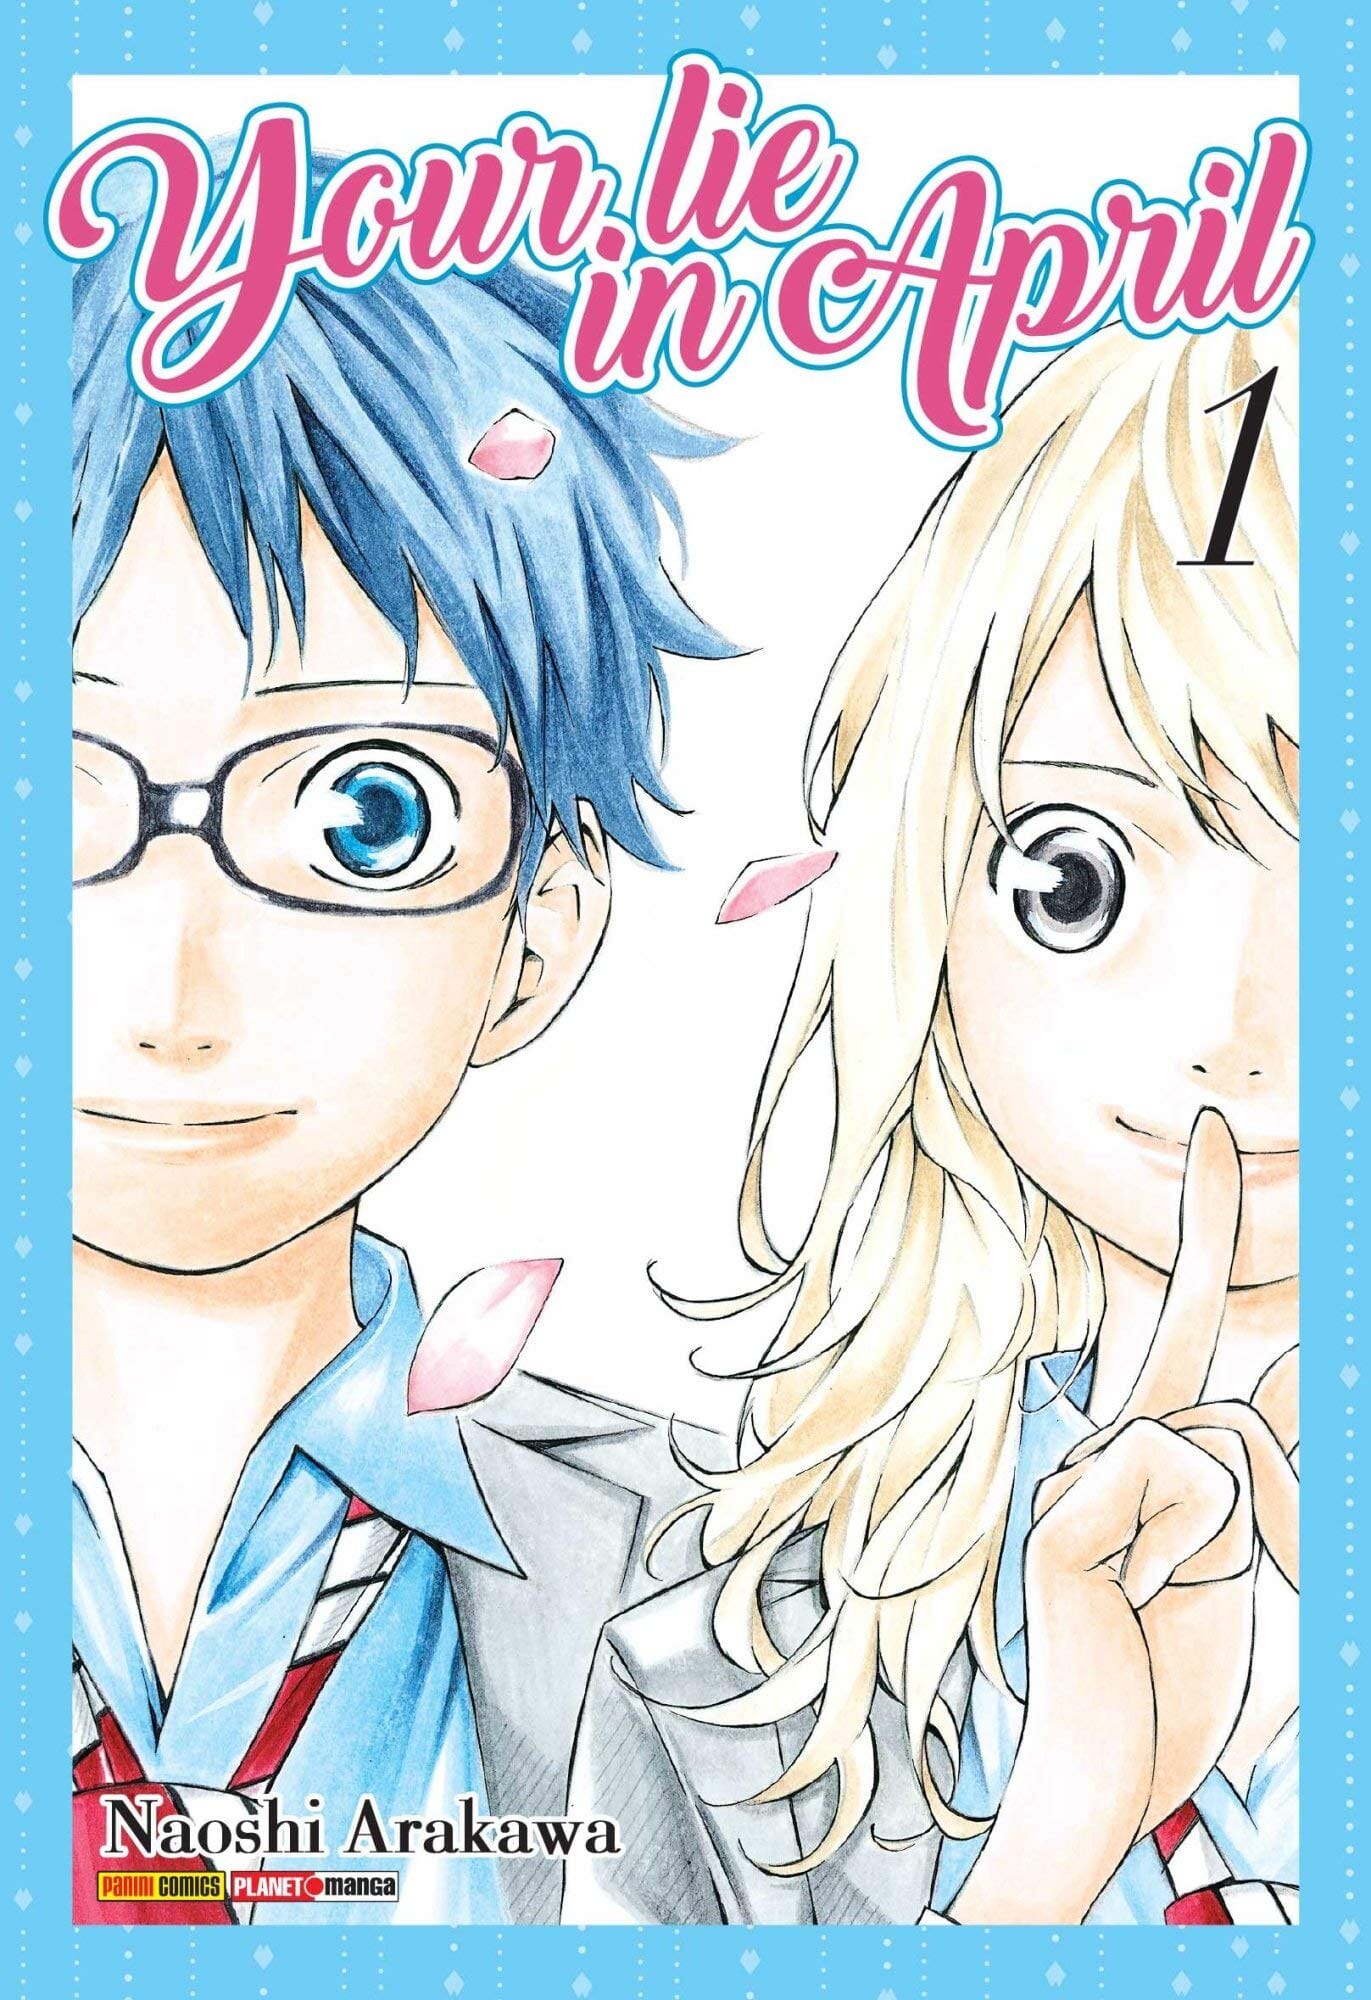 Your lie in april Vol. 1 | Multizone: Comics And Games